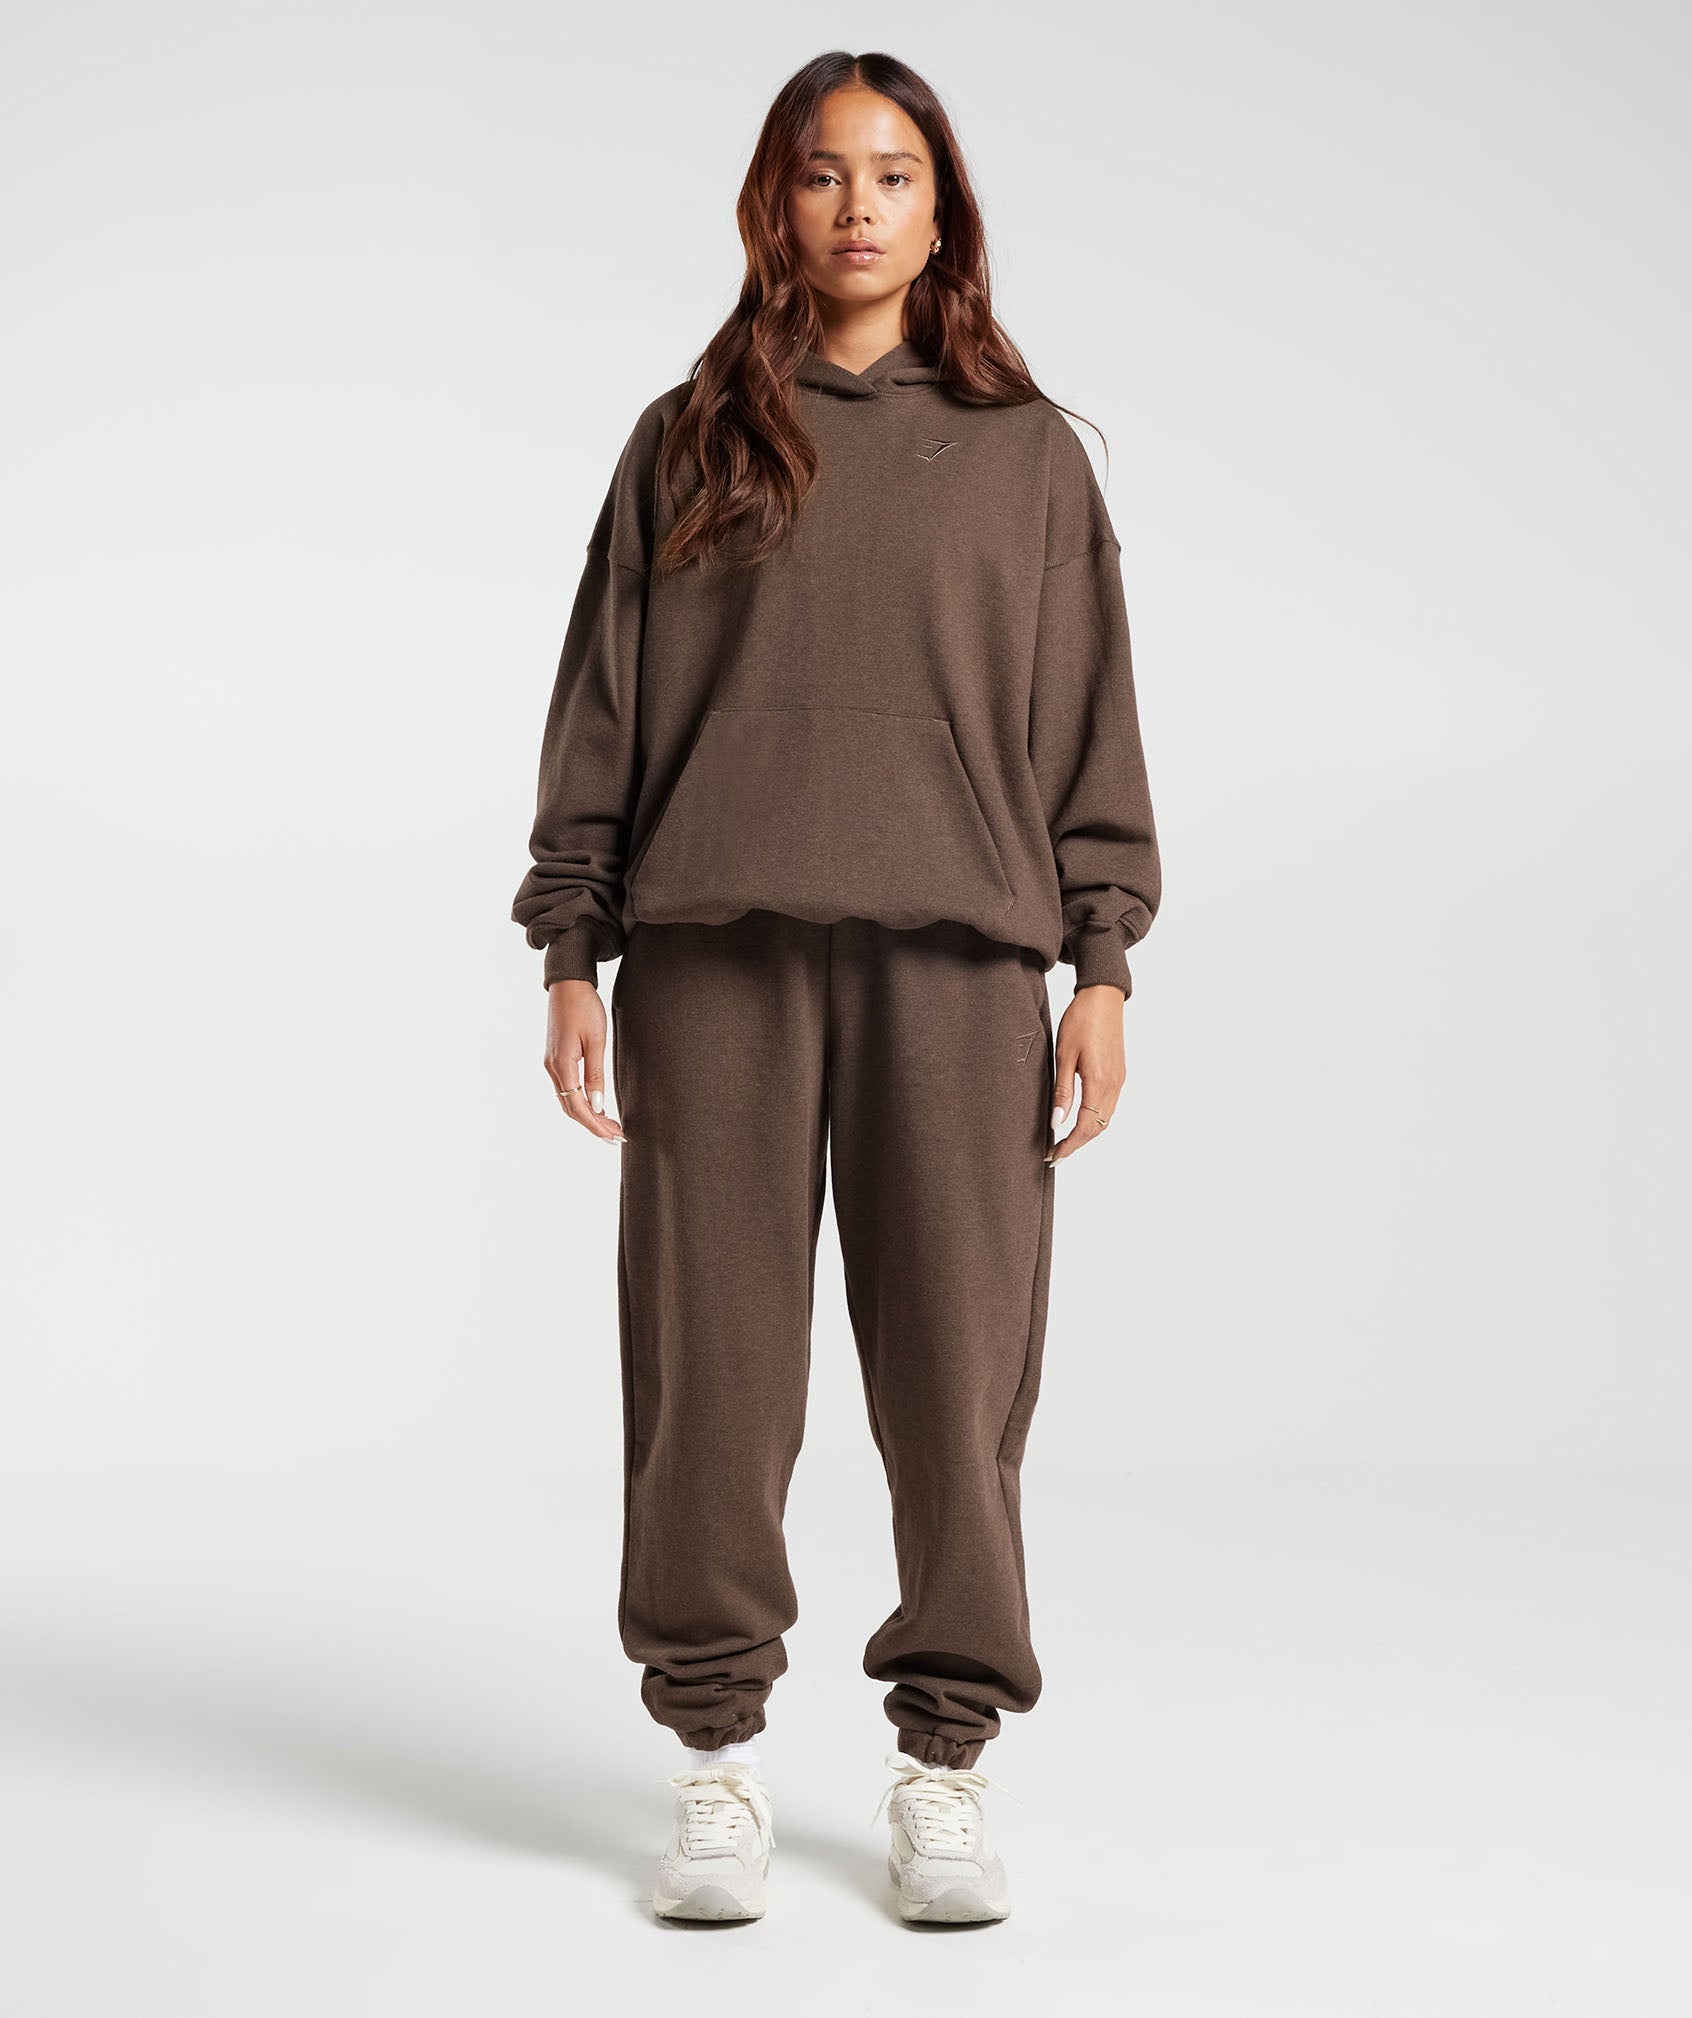 Rest Day Sweats Hoodie in Cozy Brown Marl - view 9